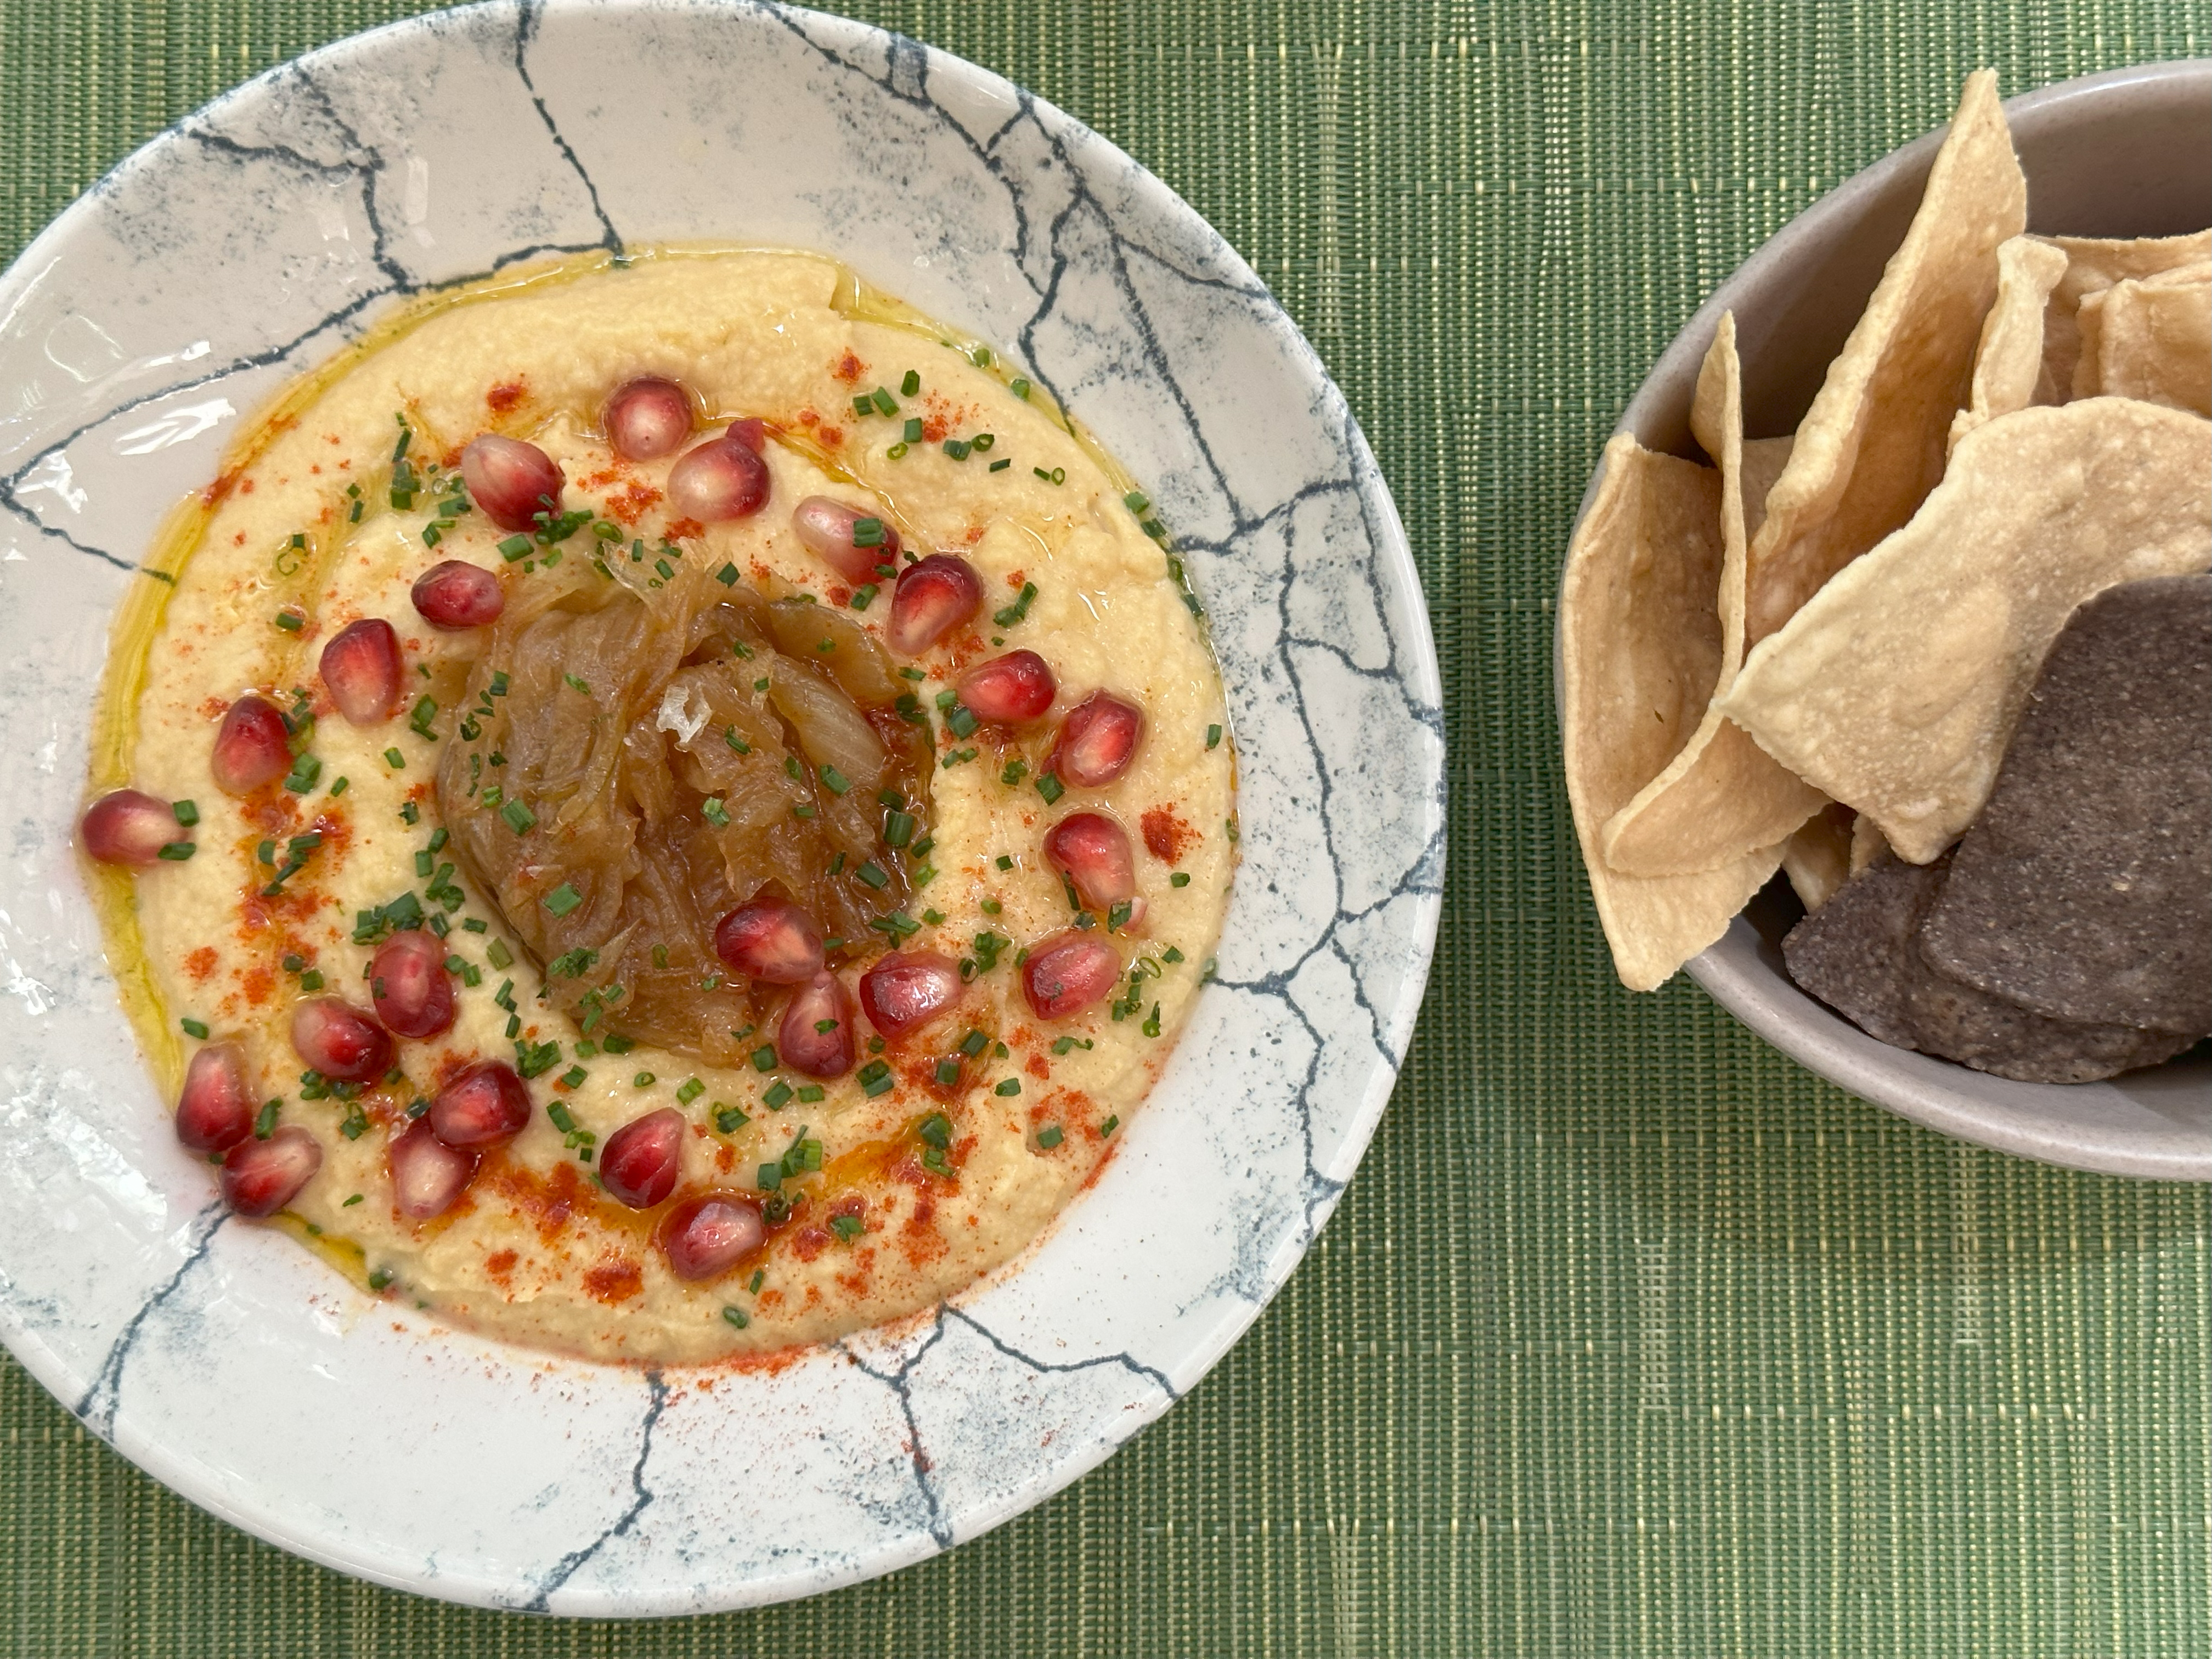 Hummus with caramelized onion, pomegranate and pita bread